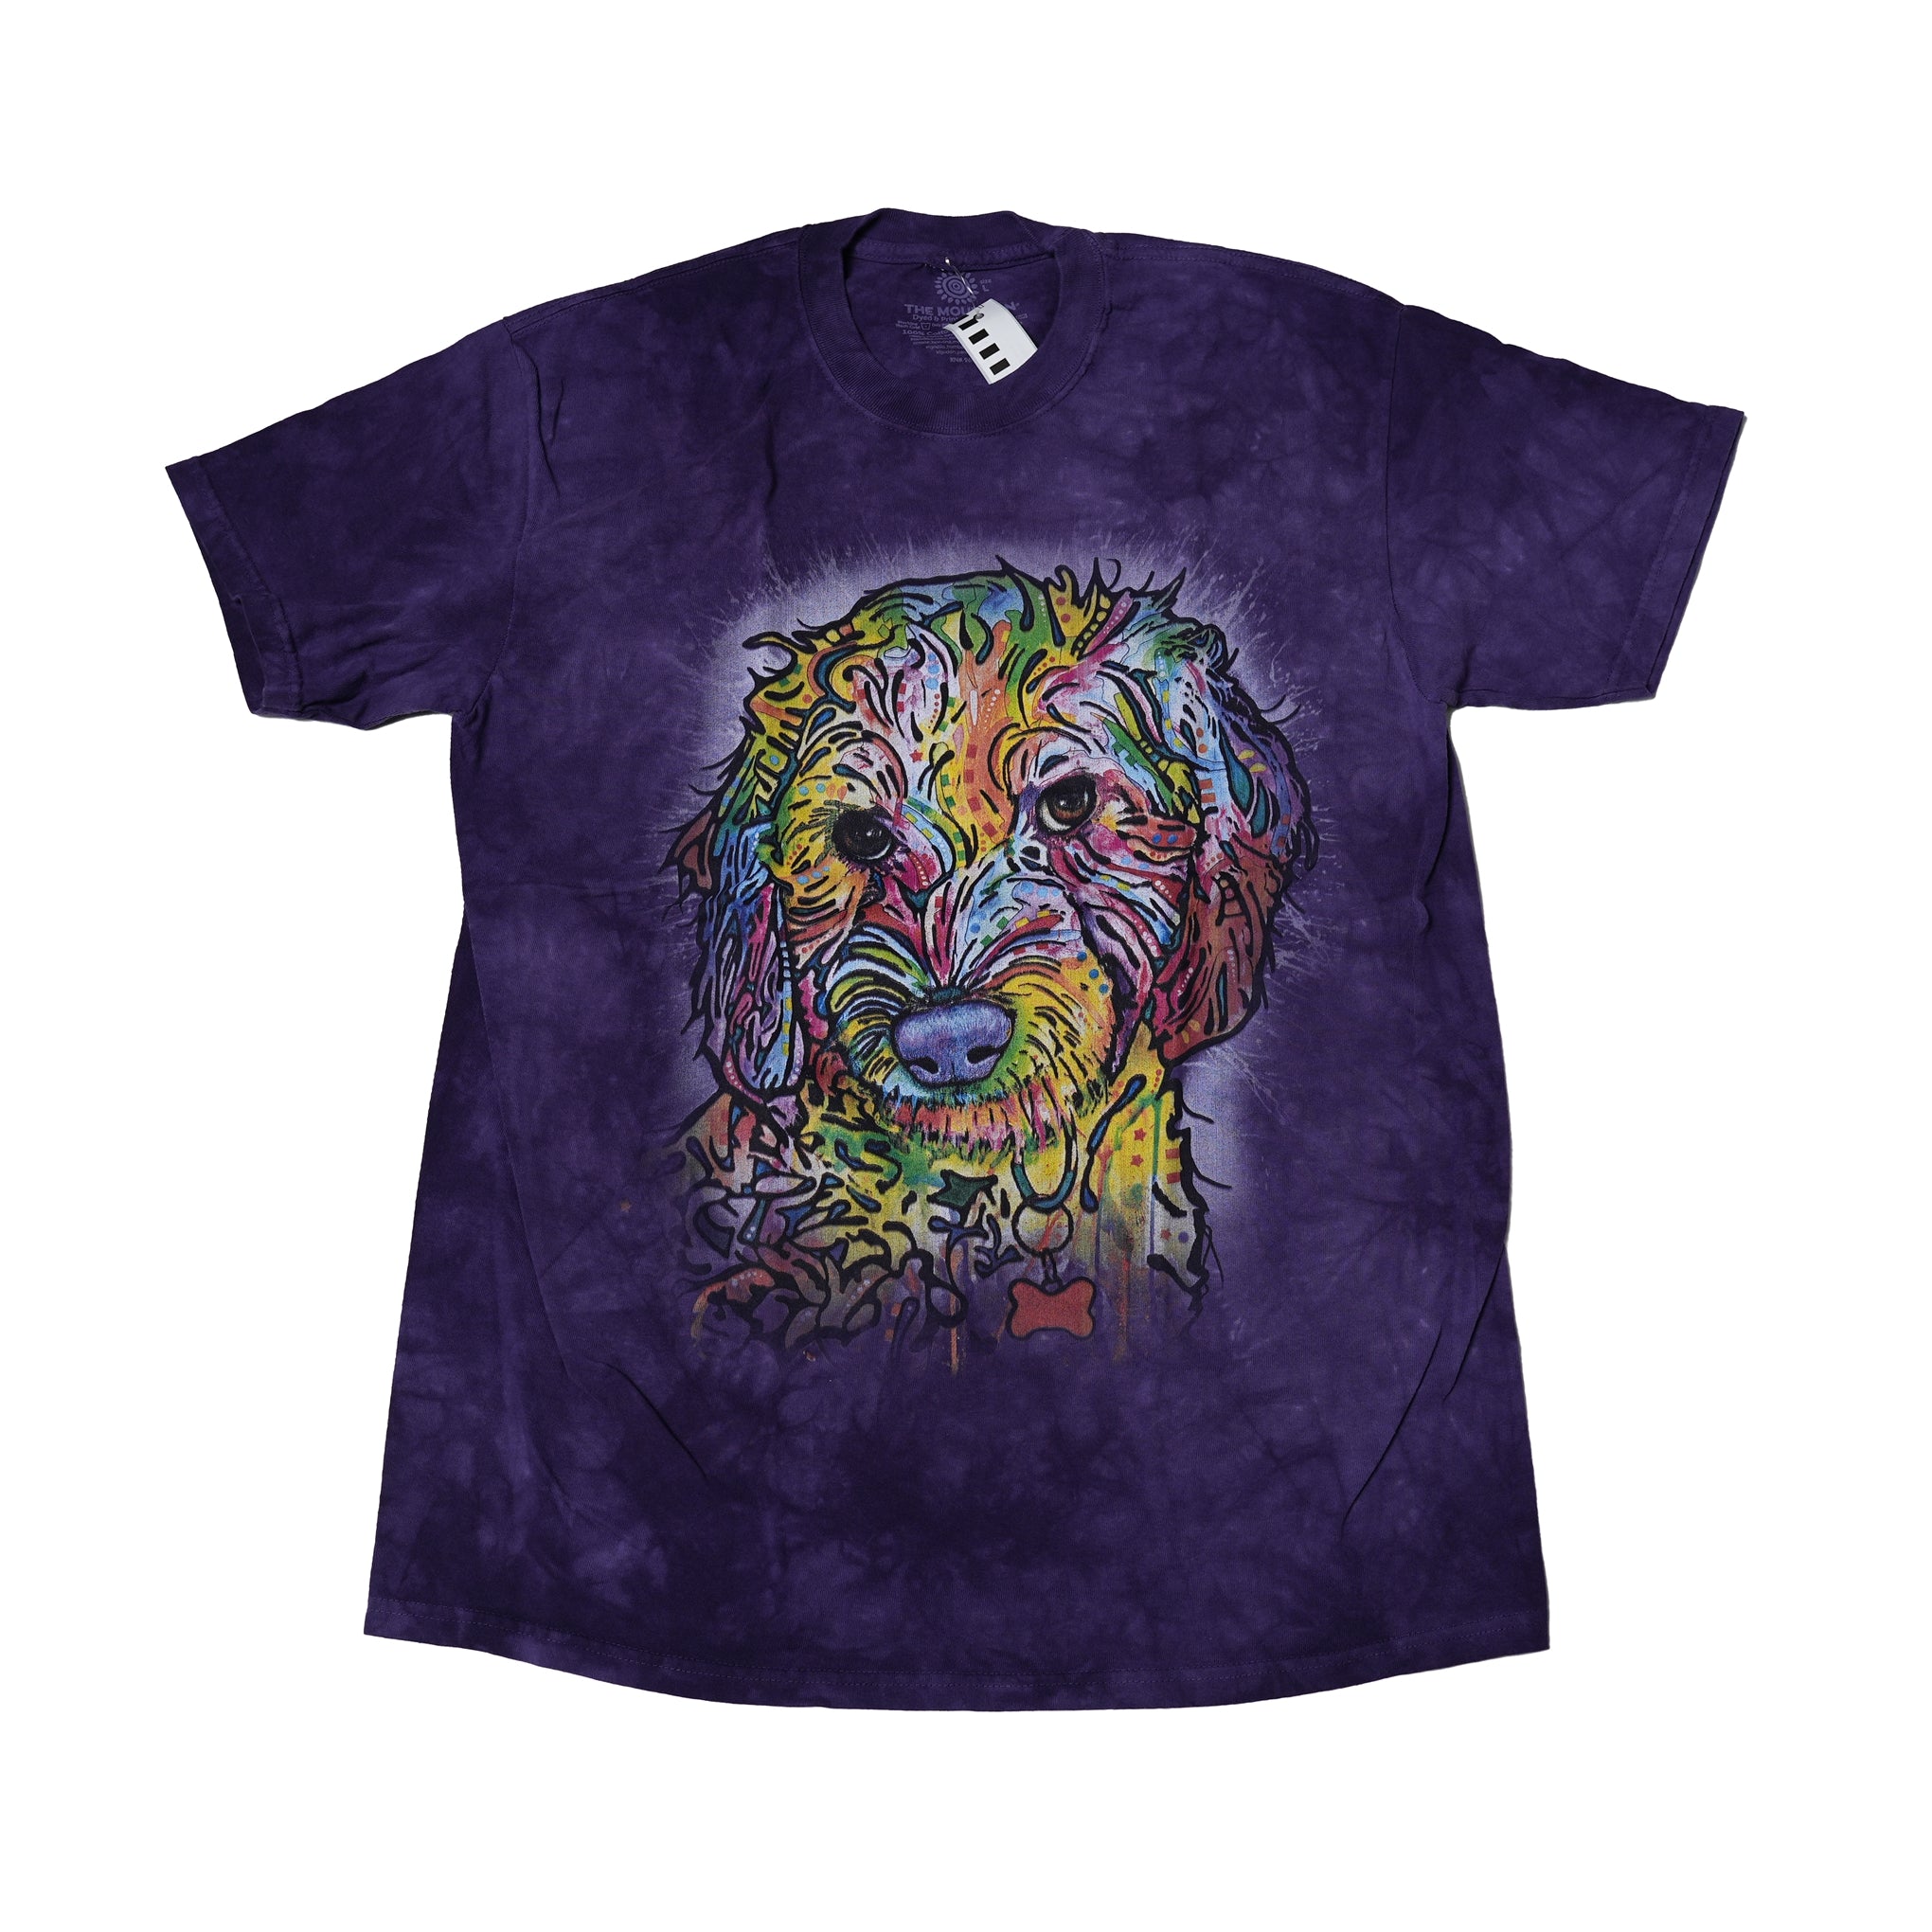 No:1068370314 | Name:Adult Classic Tee | Color:Purple Sweet Poodle【THE MOUNTAIN_ザ マウンテン】